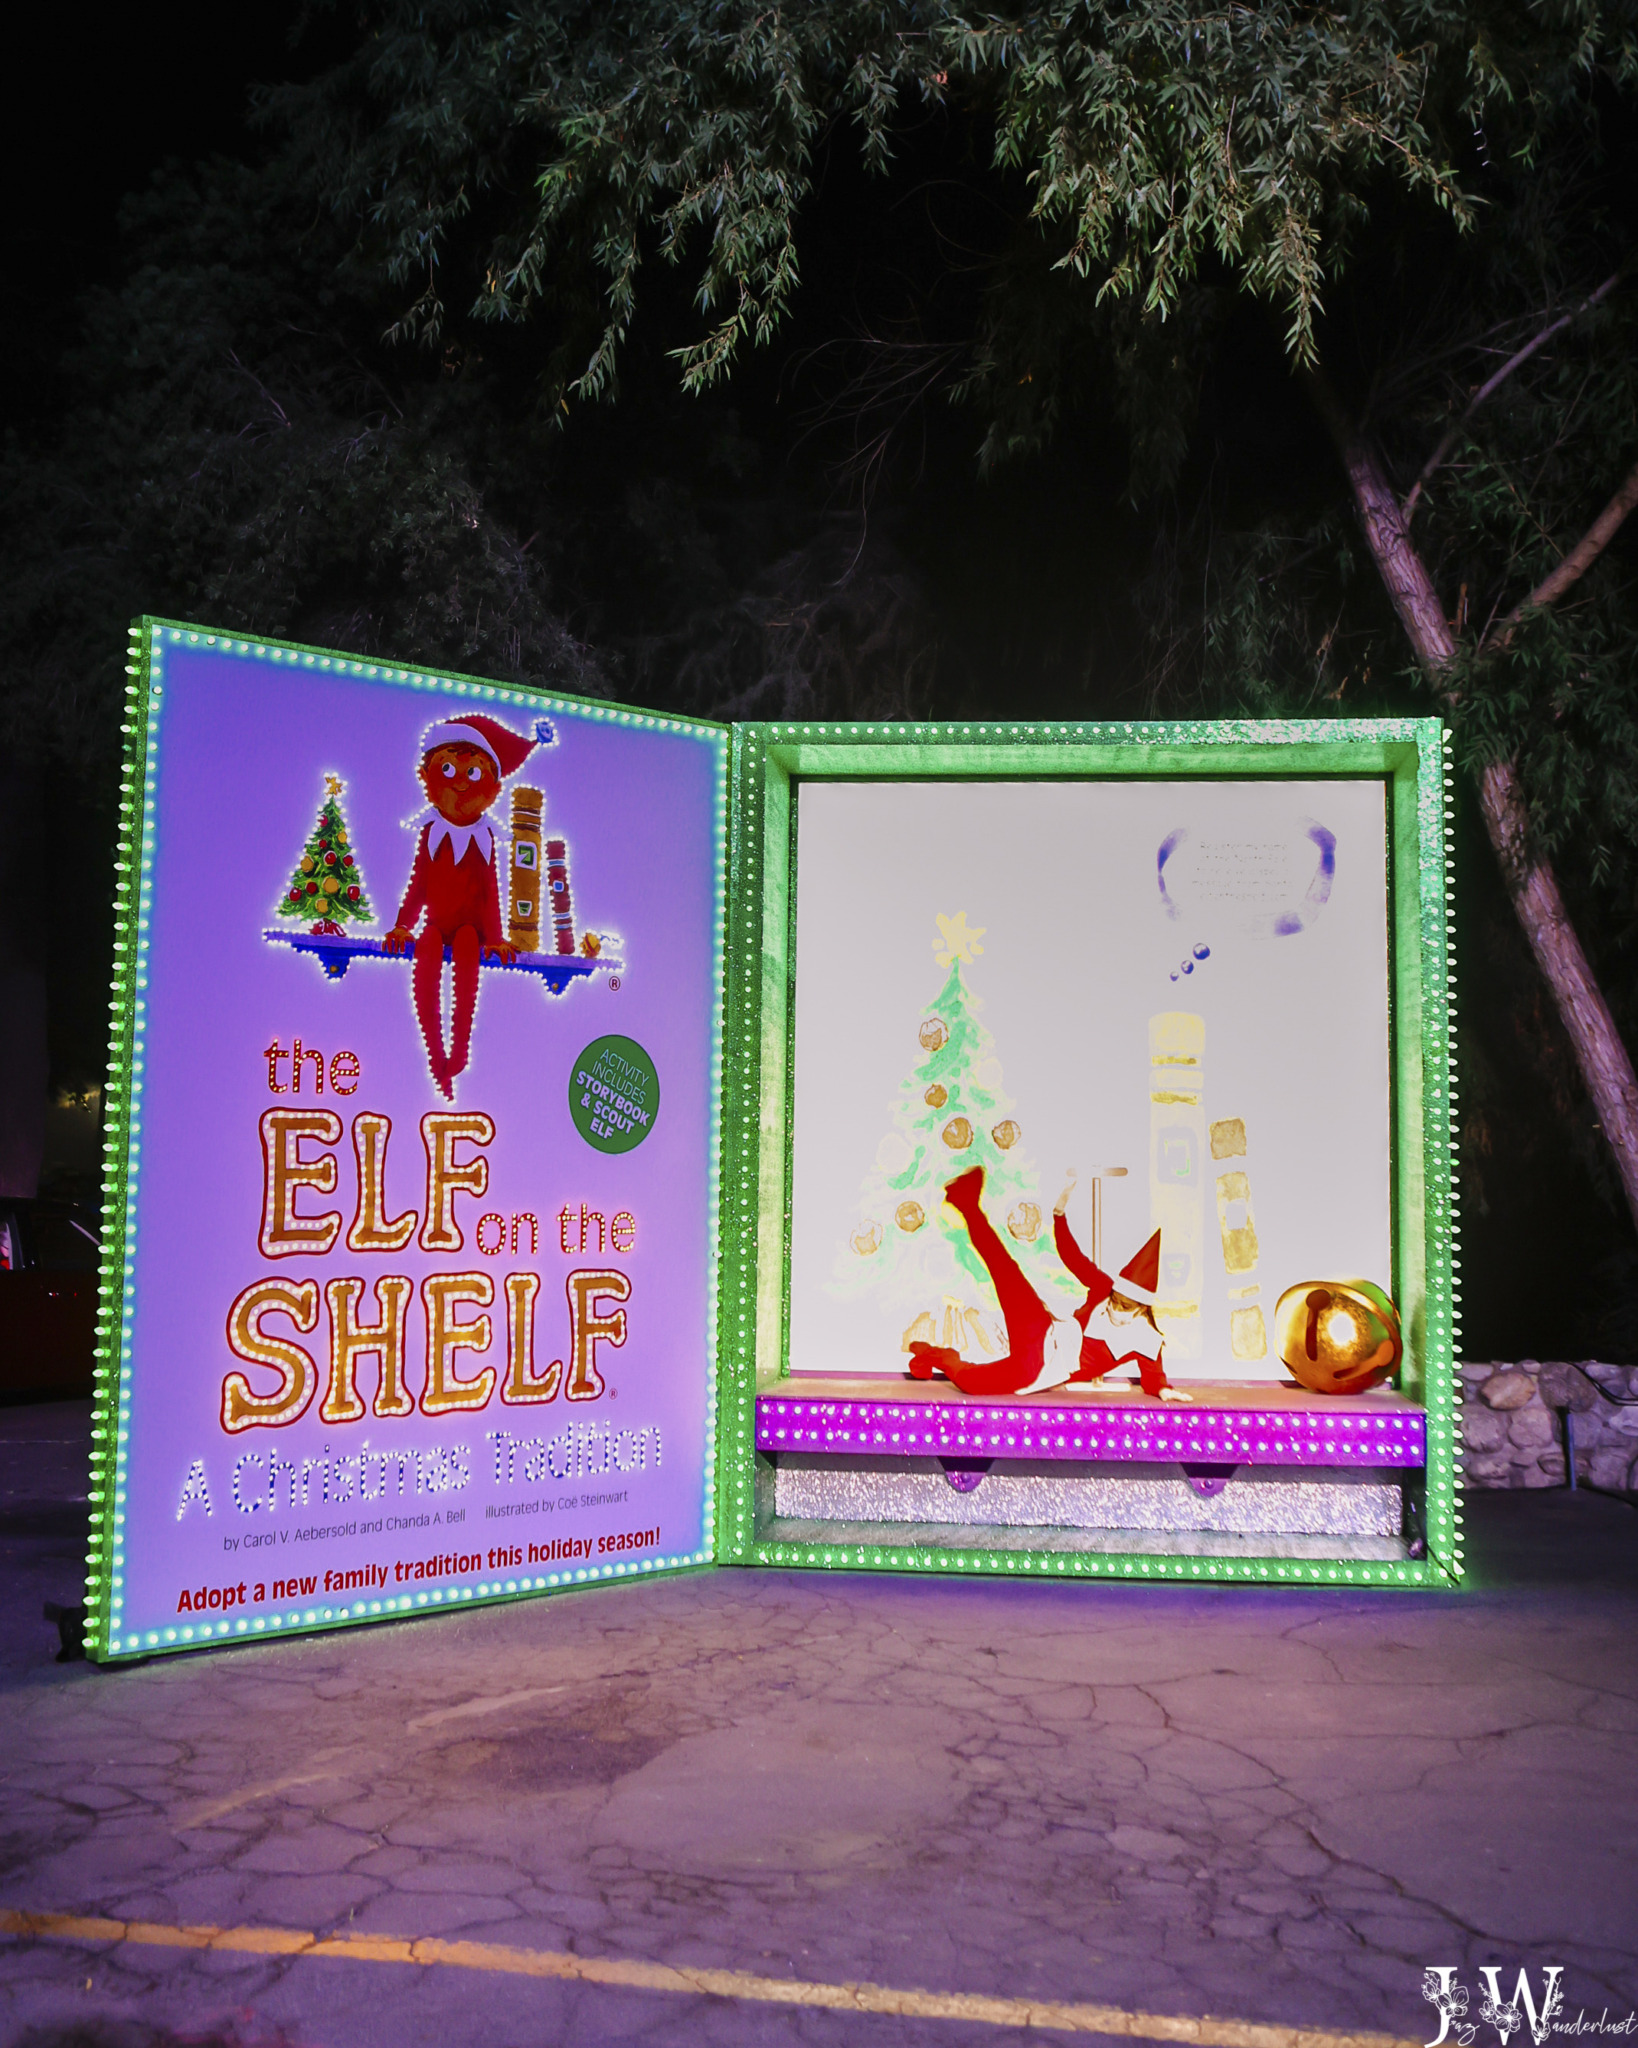 Life-sized Elf on the Shelf storybook at  holiday event. Photography by Jaz Wanderlust.